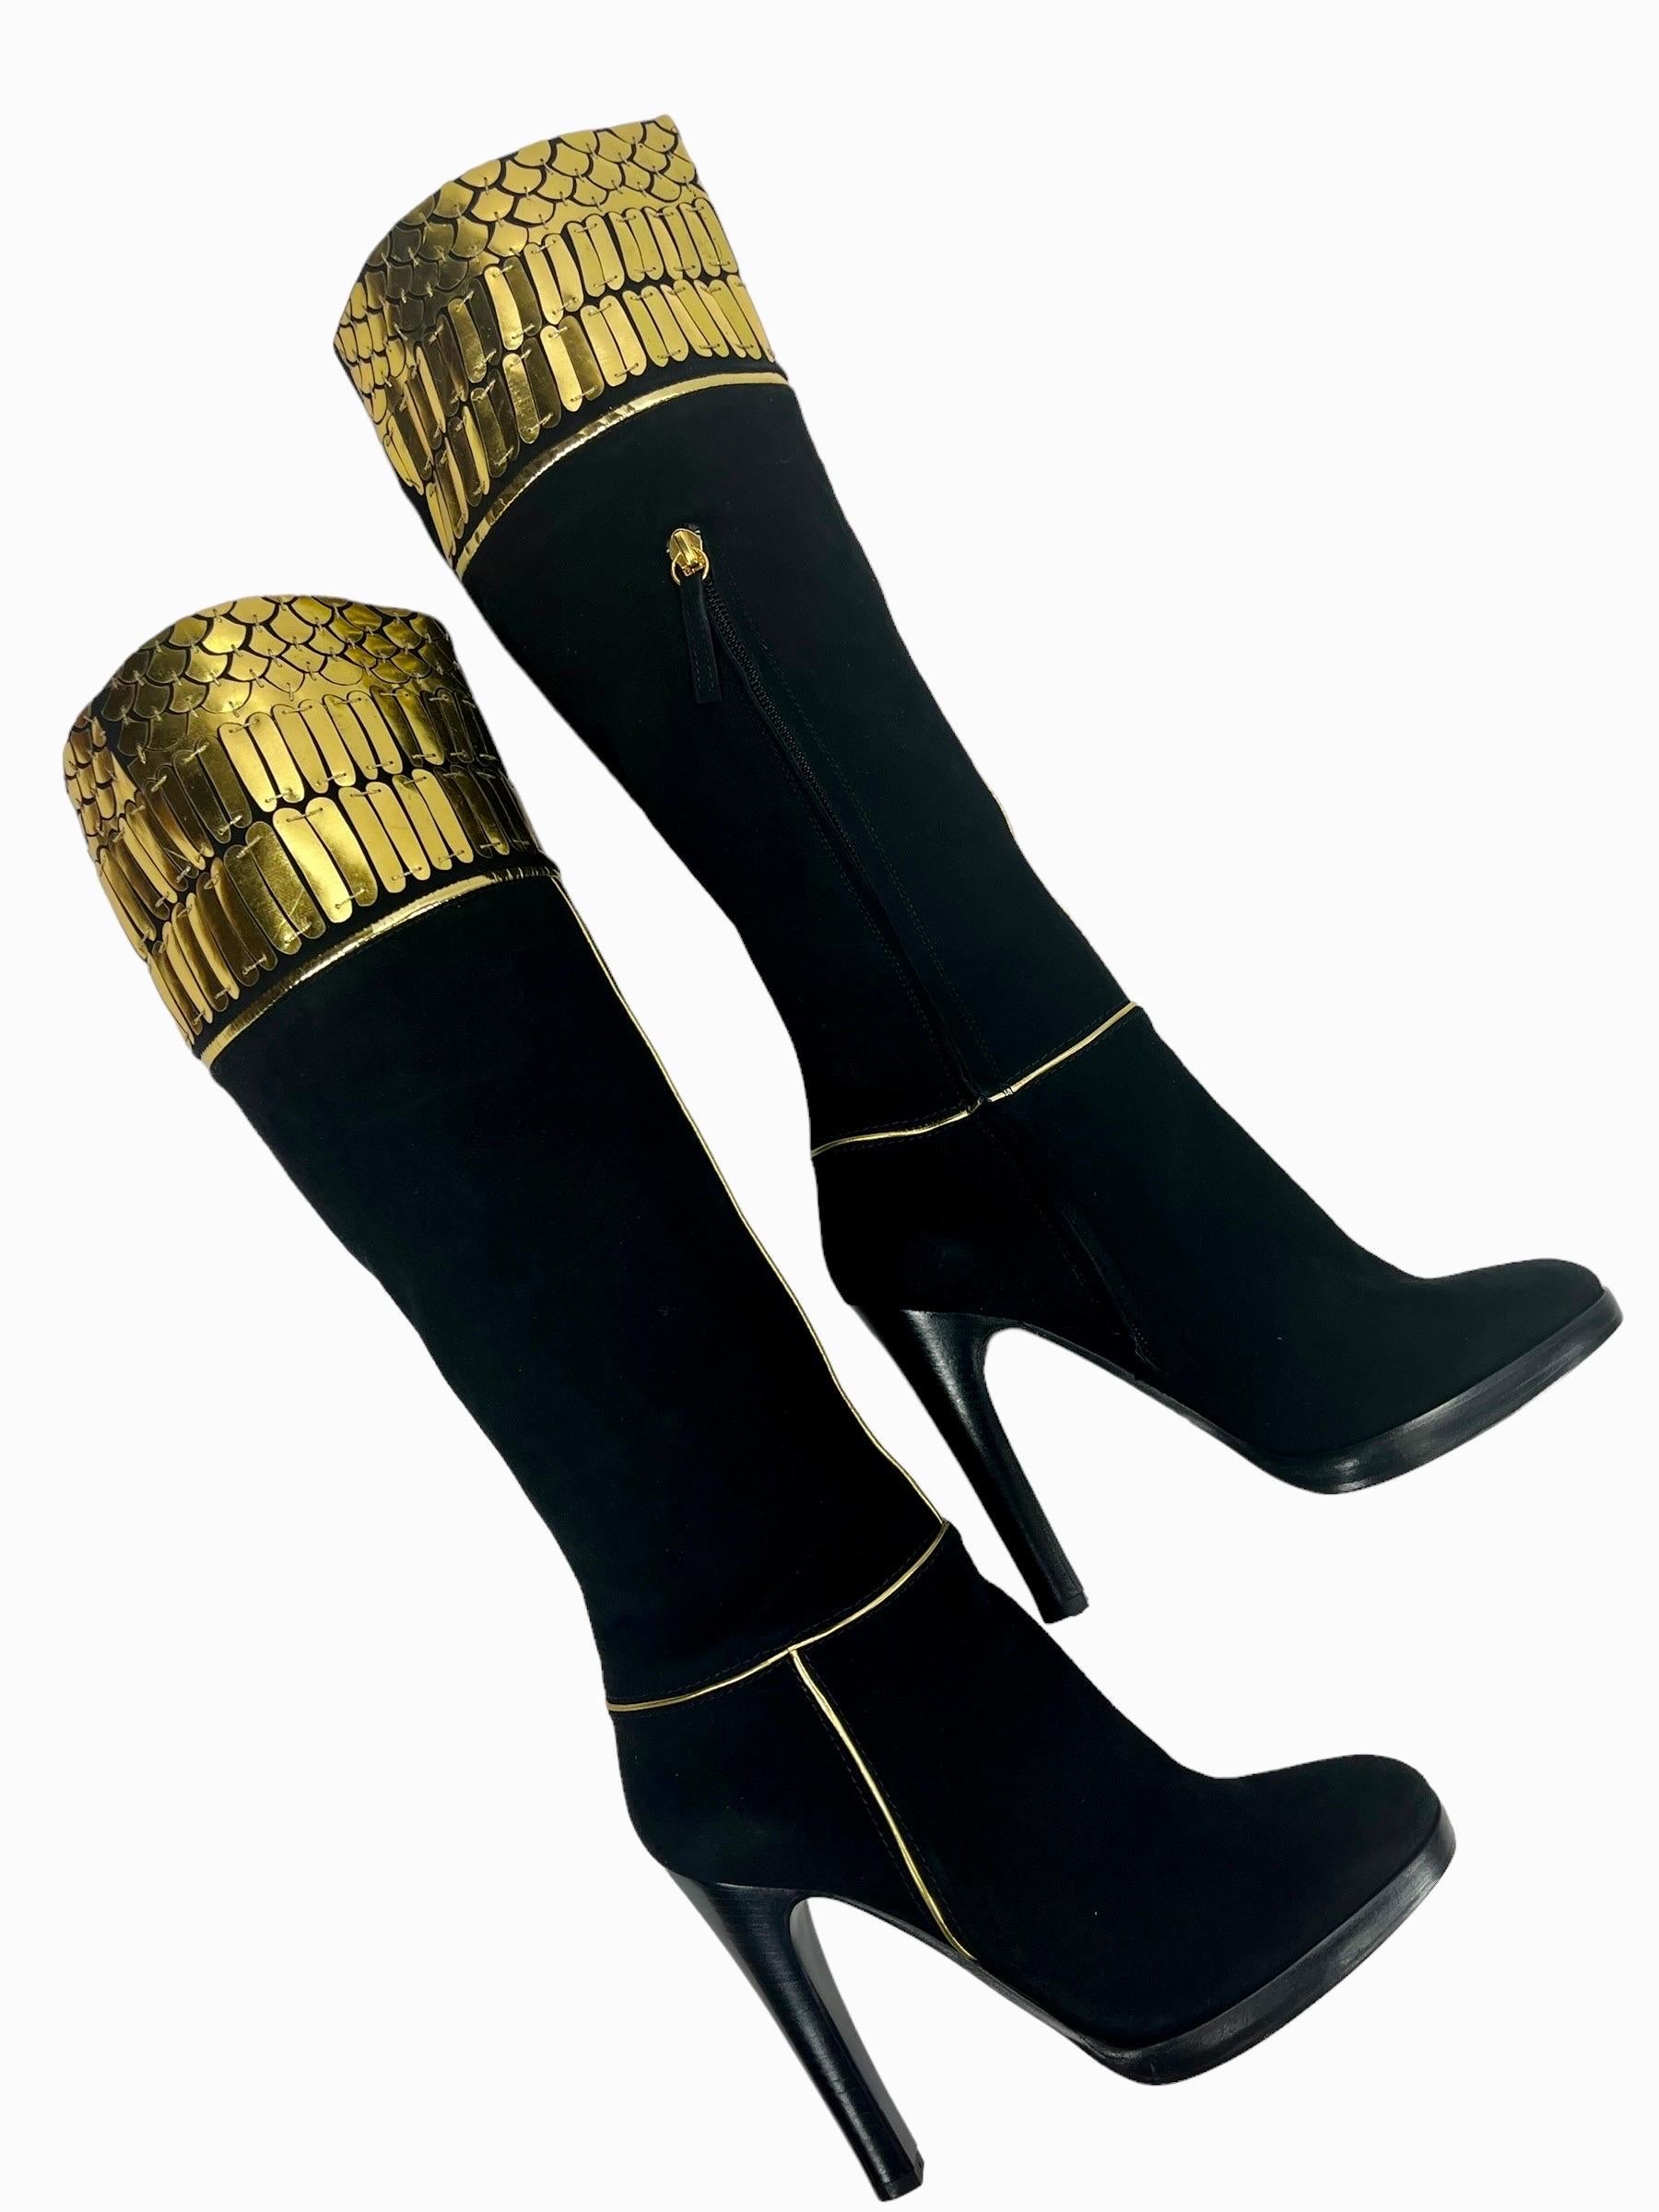 Women's New Roberto Cavalli Black Suede Leather Knee Length Boots Gold Detail 38.5 & 41 For Sale